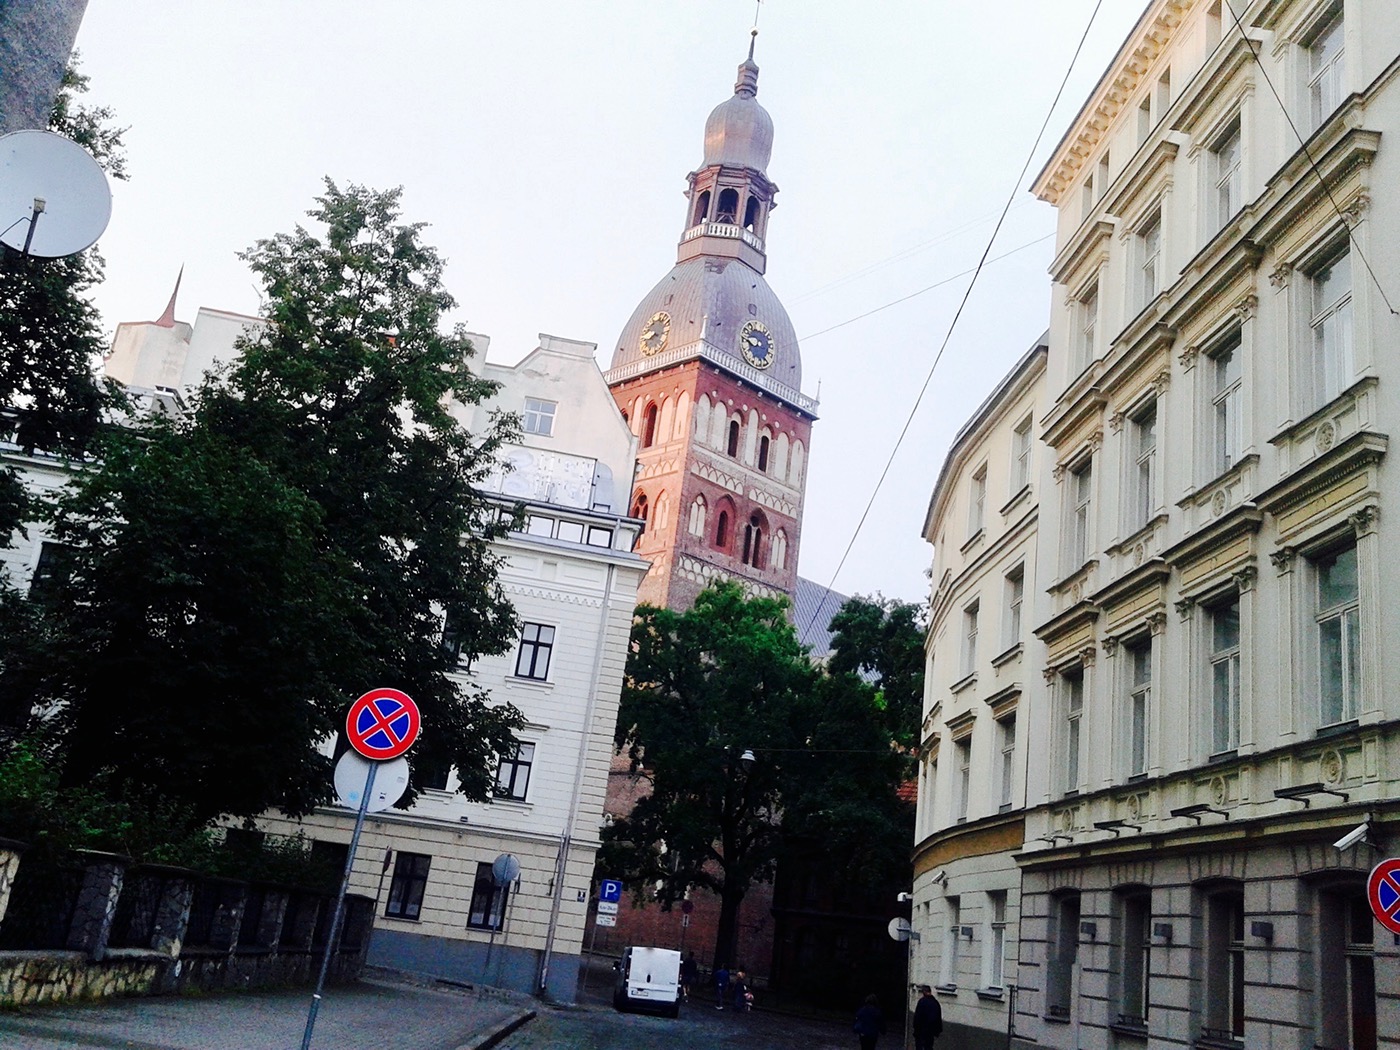 old town Riga real estate buildings neighborhood rental historic architecture